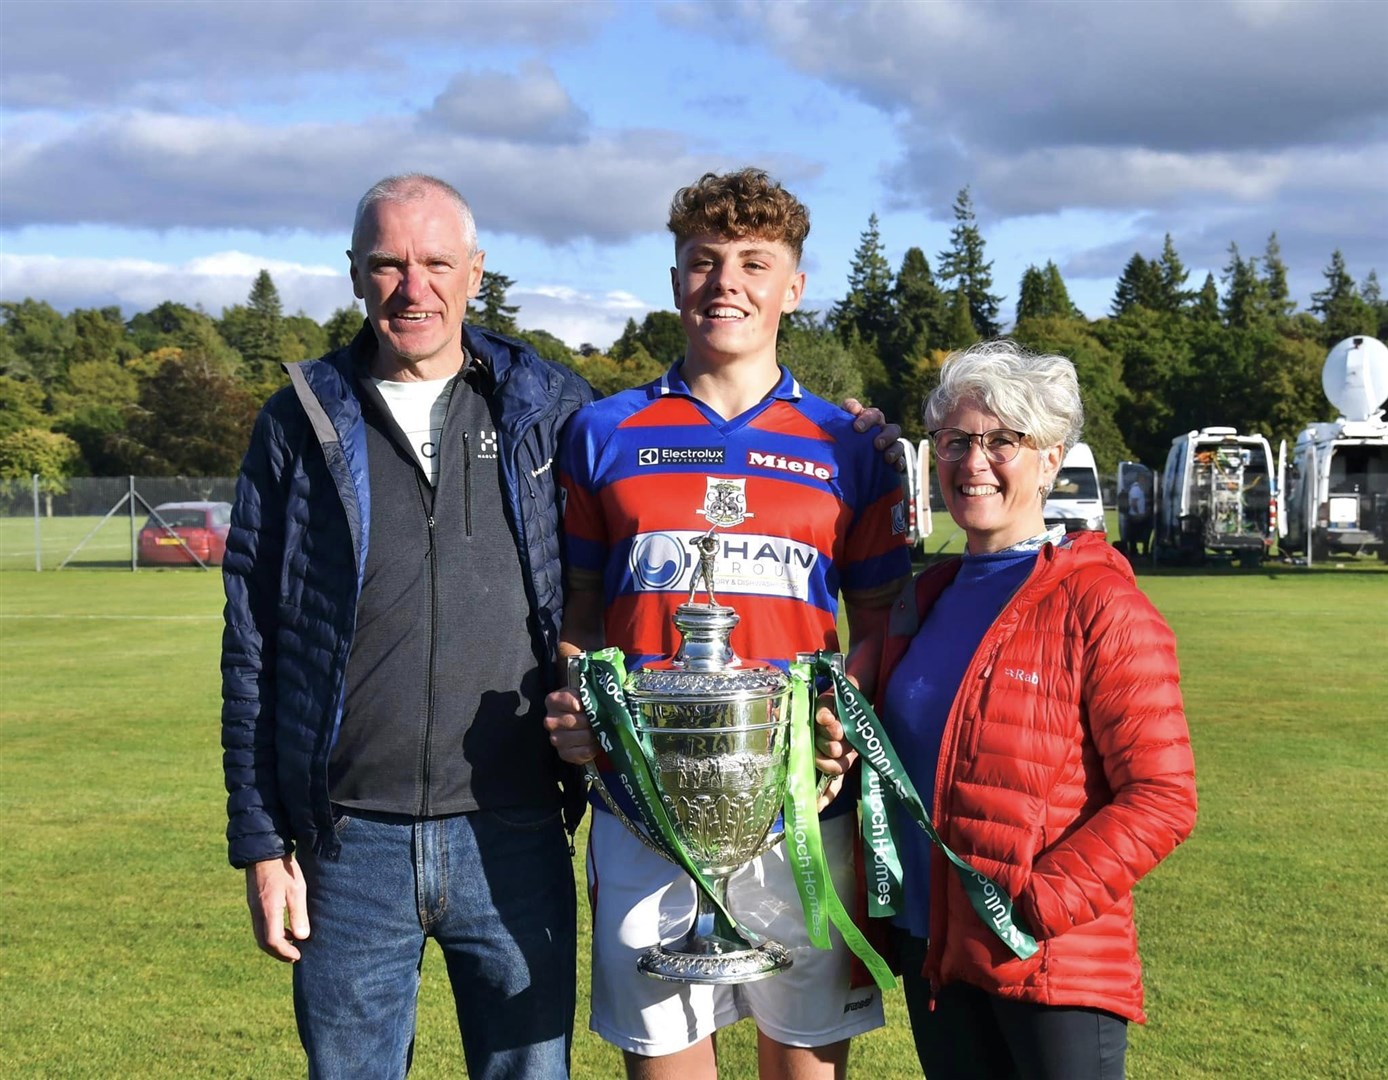 Calum shows off the Camanachd Cup with his proud parents Iain and Ann.